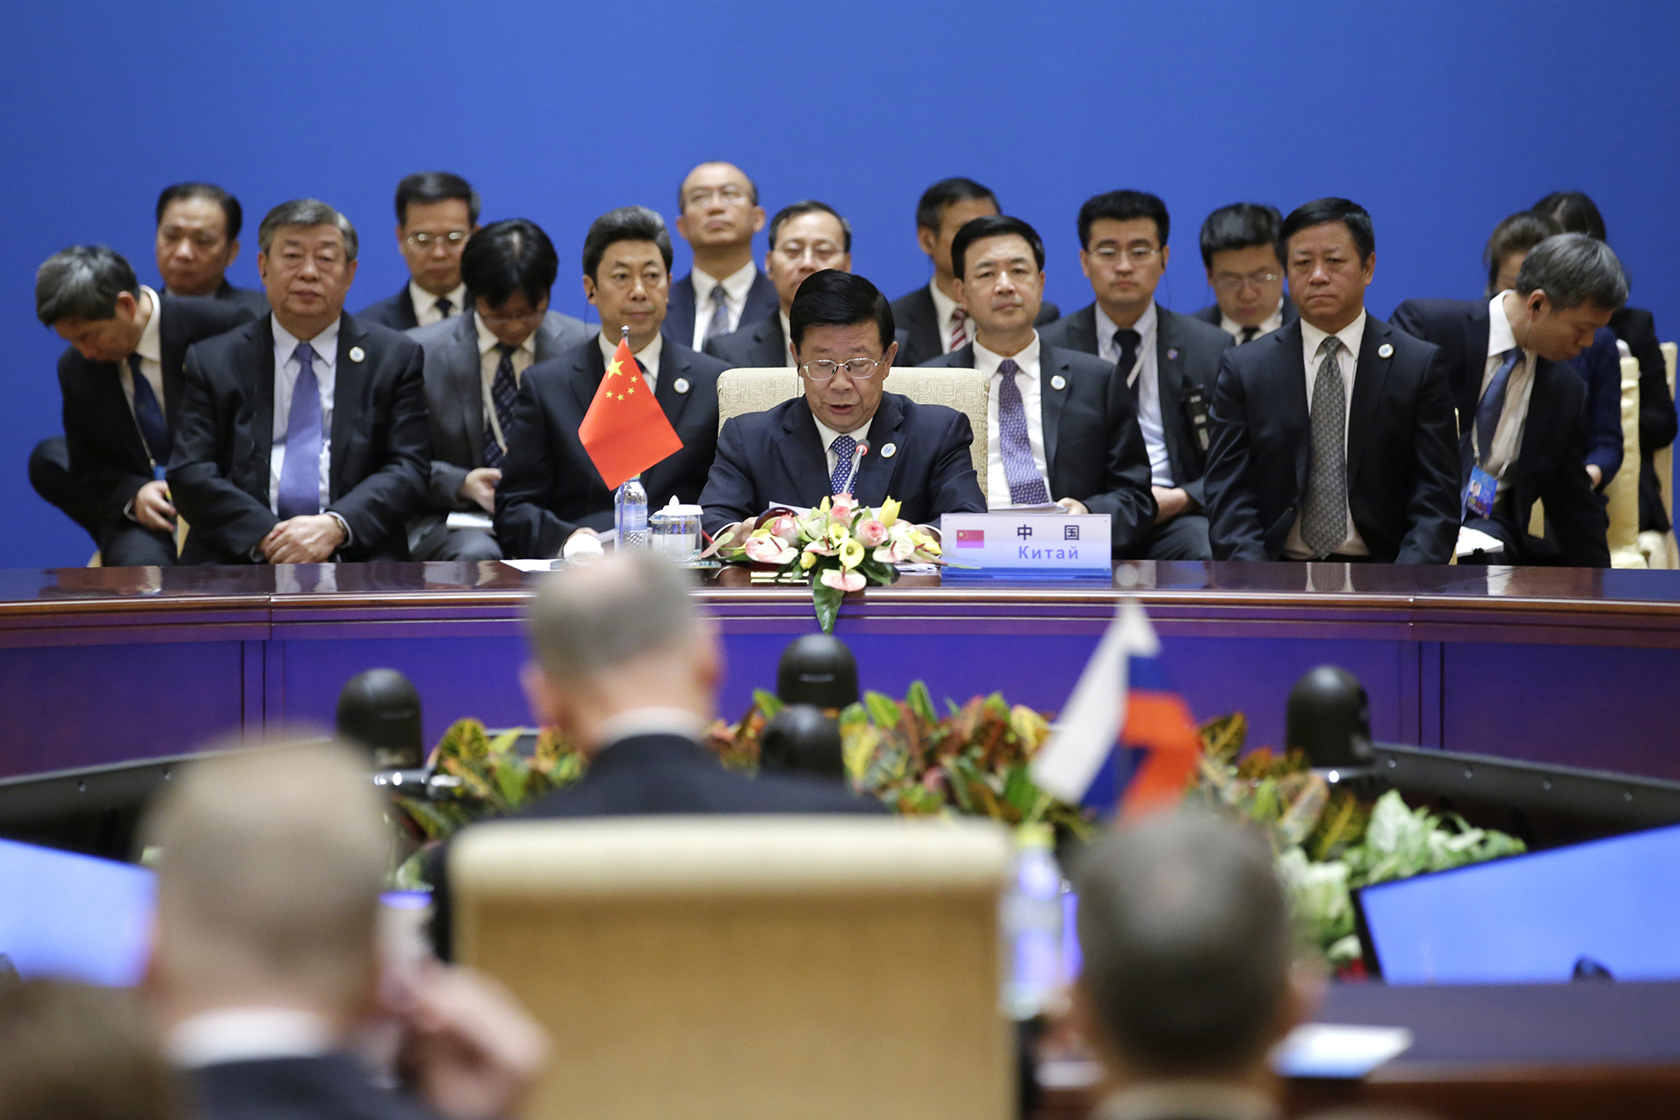 Zhao Kezhi seated behind table surrounded by attendees